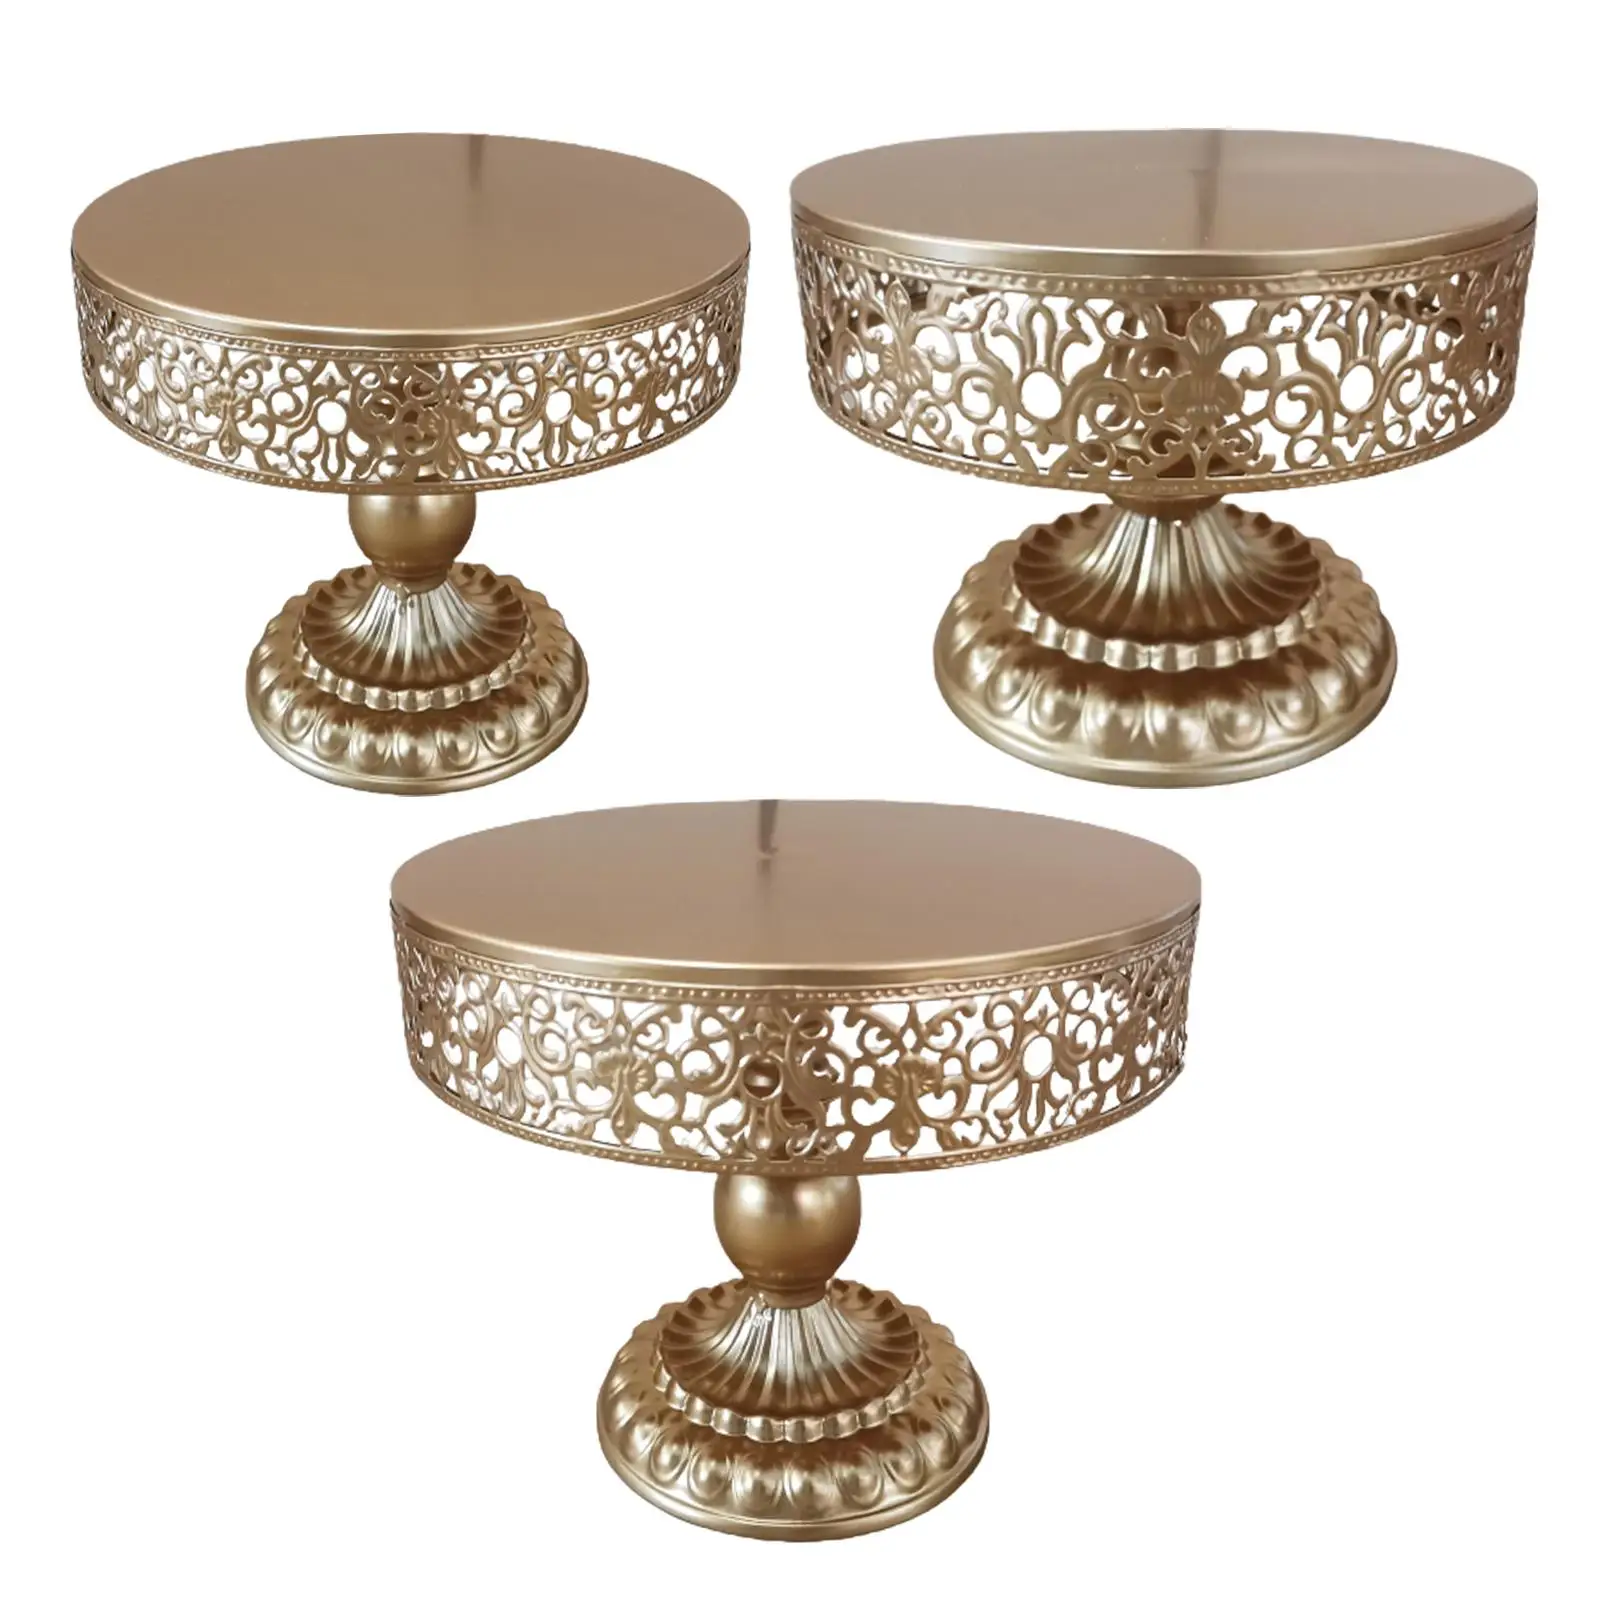 Cake Stand, Pastry Trays Holder Dessert Display Plate for Ornament Birthday Afternoon Tea